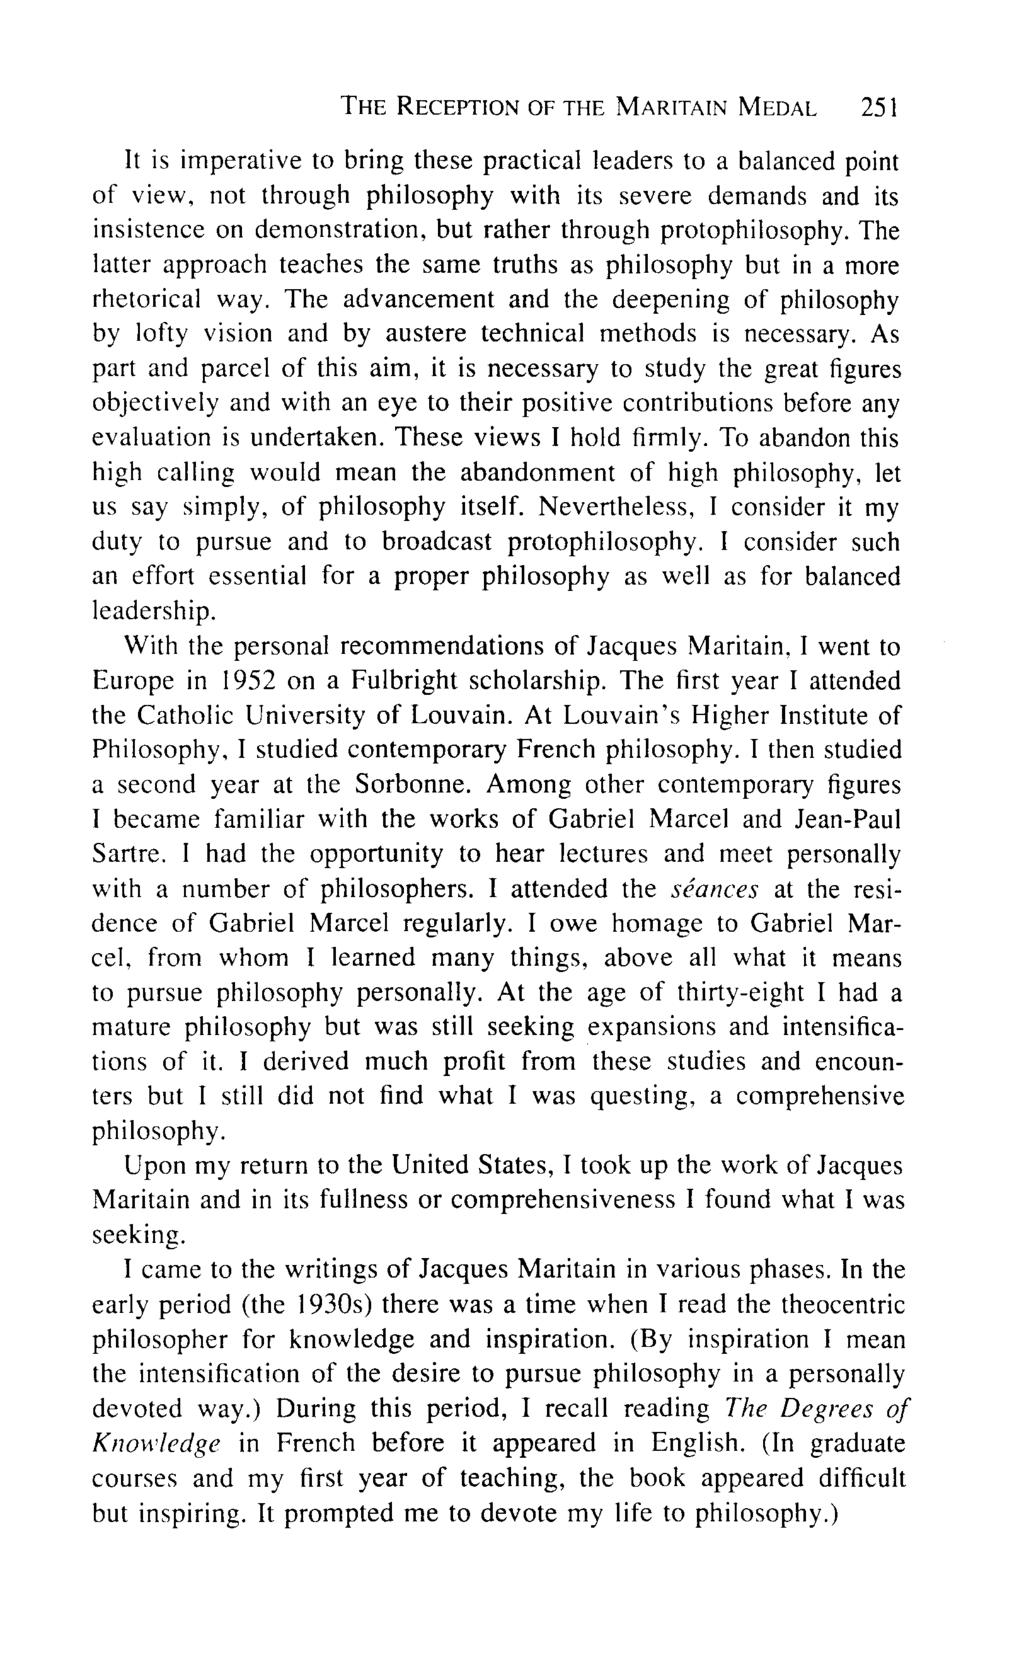 THE RECEPTION OF THE MARITAIN MEDAL 251 It is imperative to bring these practical leaders to a balanced point of view, not through philosophy with its severe demands and its insistence on